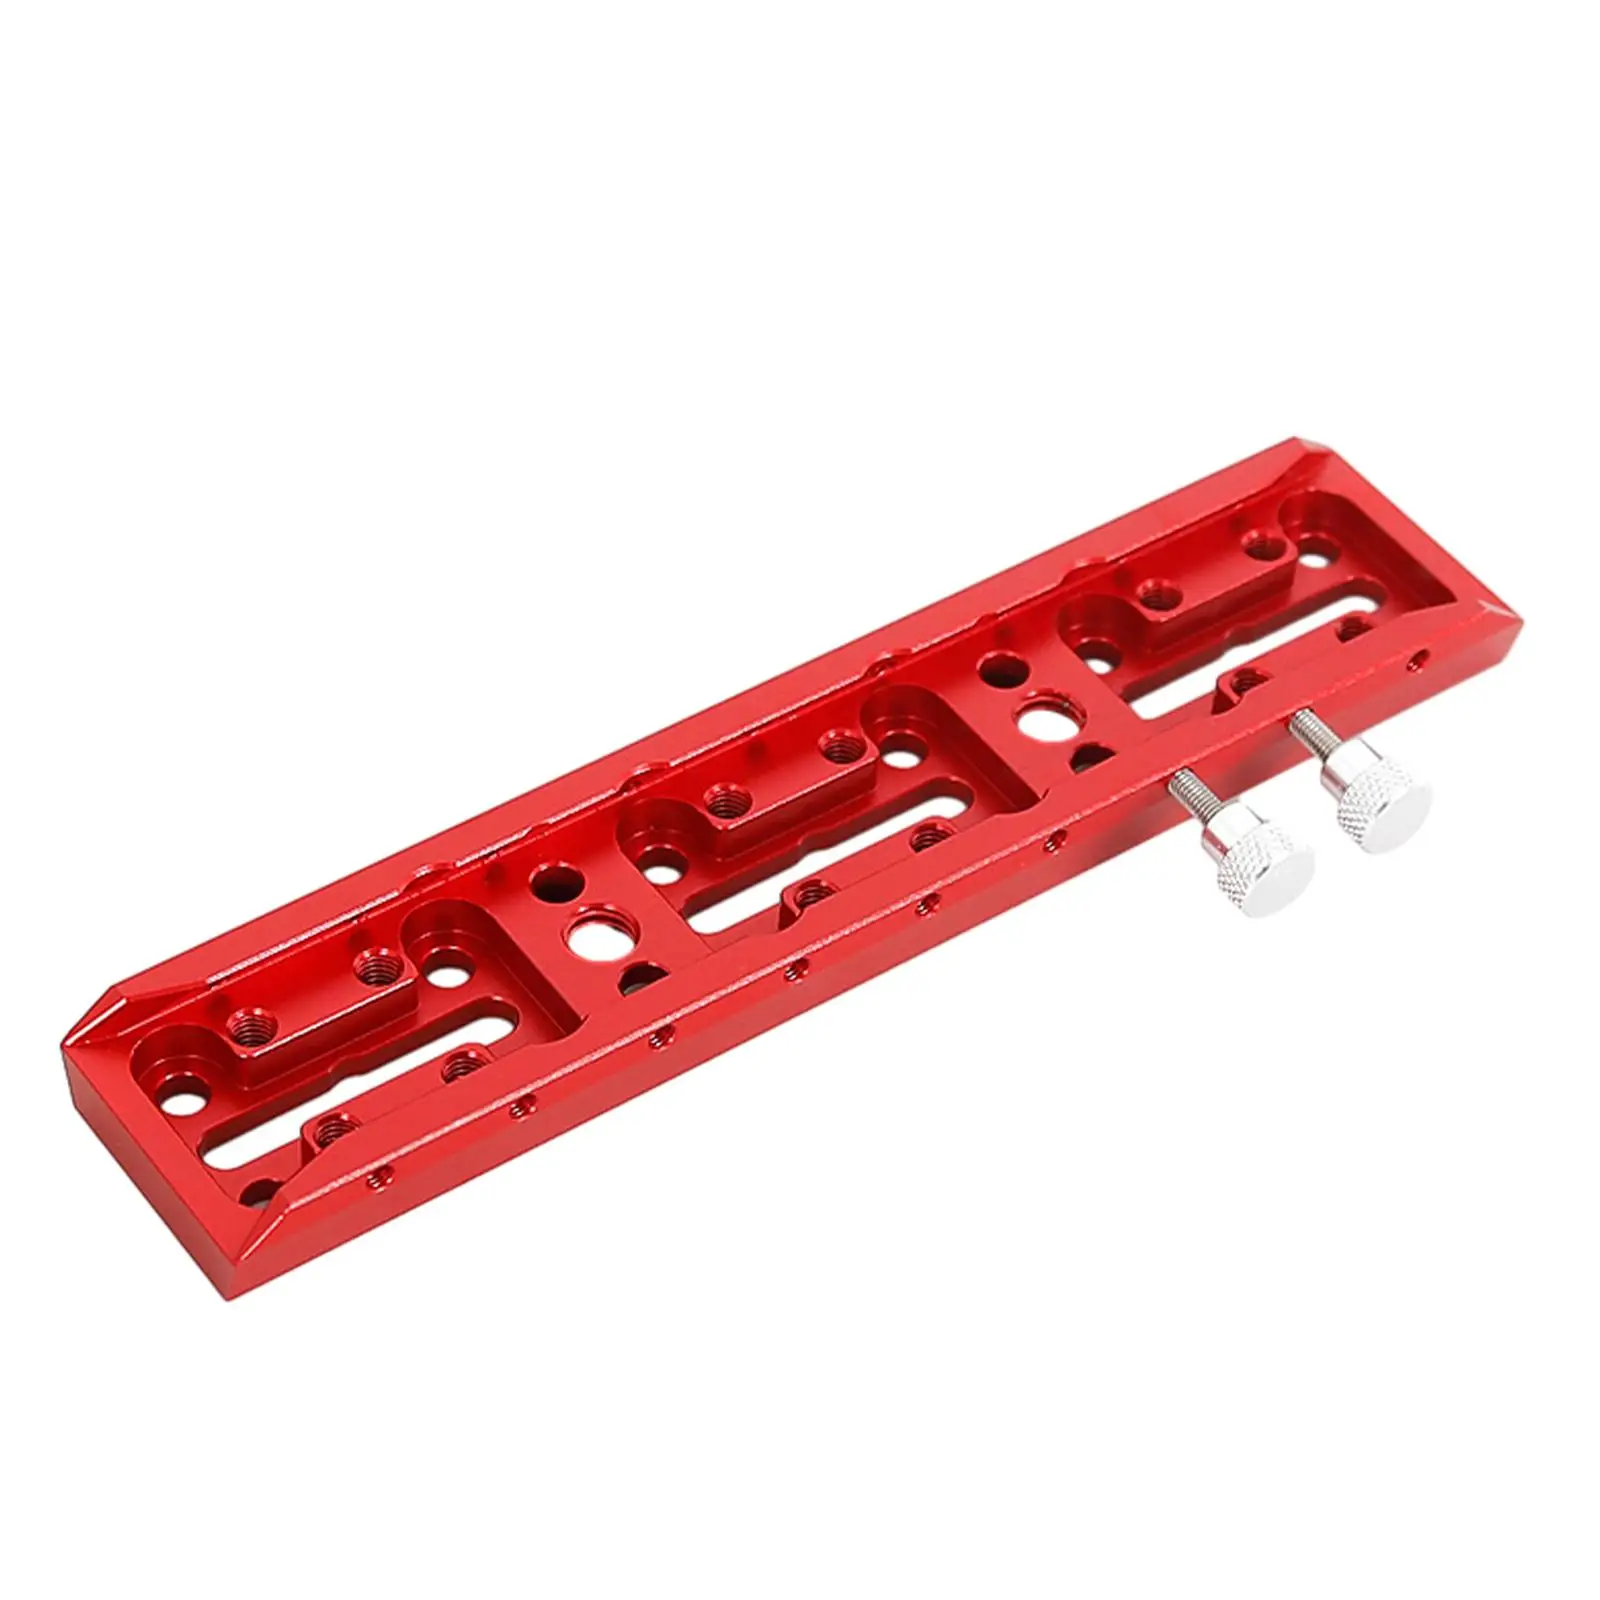 Telescope Dovetail Mounting Plate ,75 Degree Dovetail Plate with Screw, Rail Bar